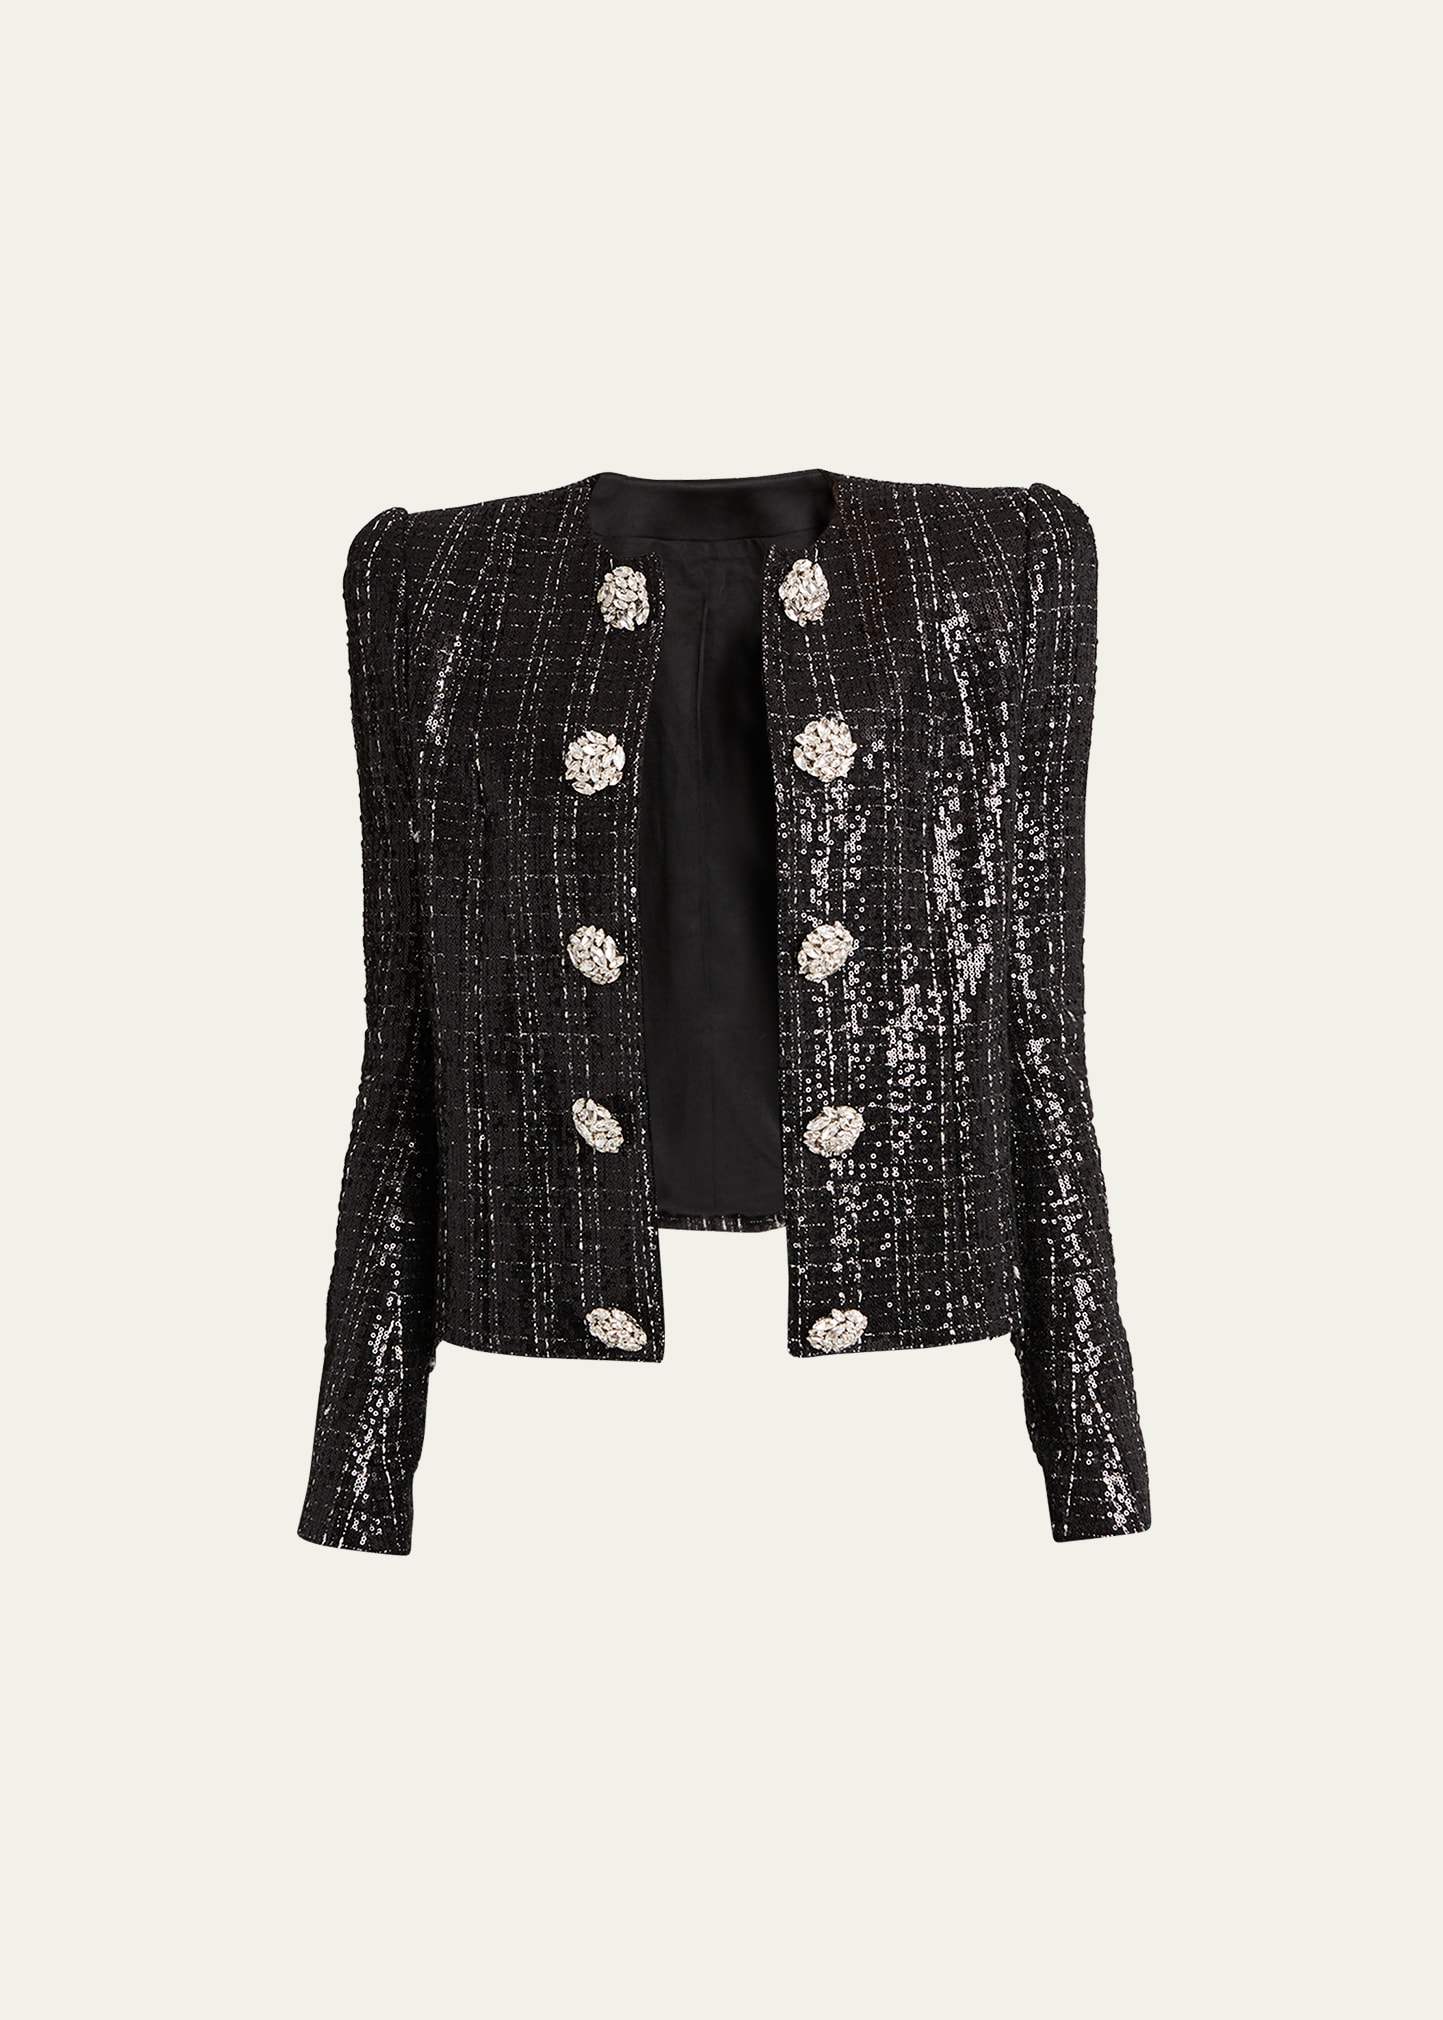 Balmain Collarless Sequined Tweed Jacket with Jewel Buttons